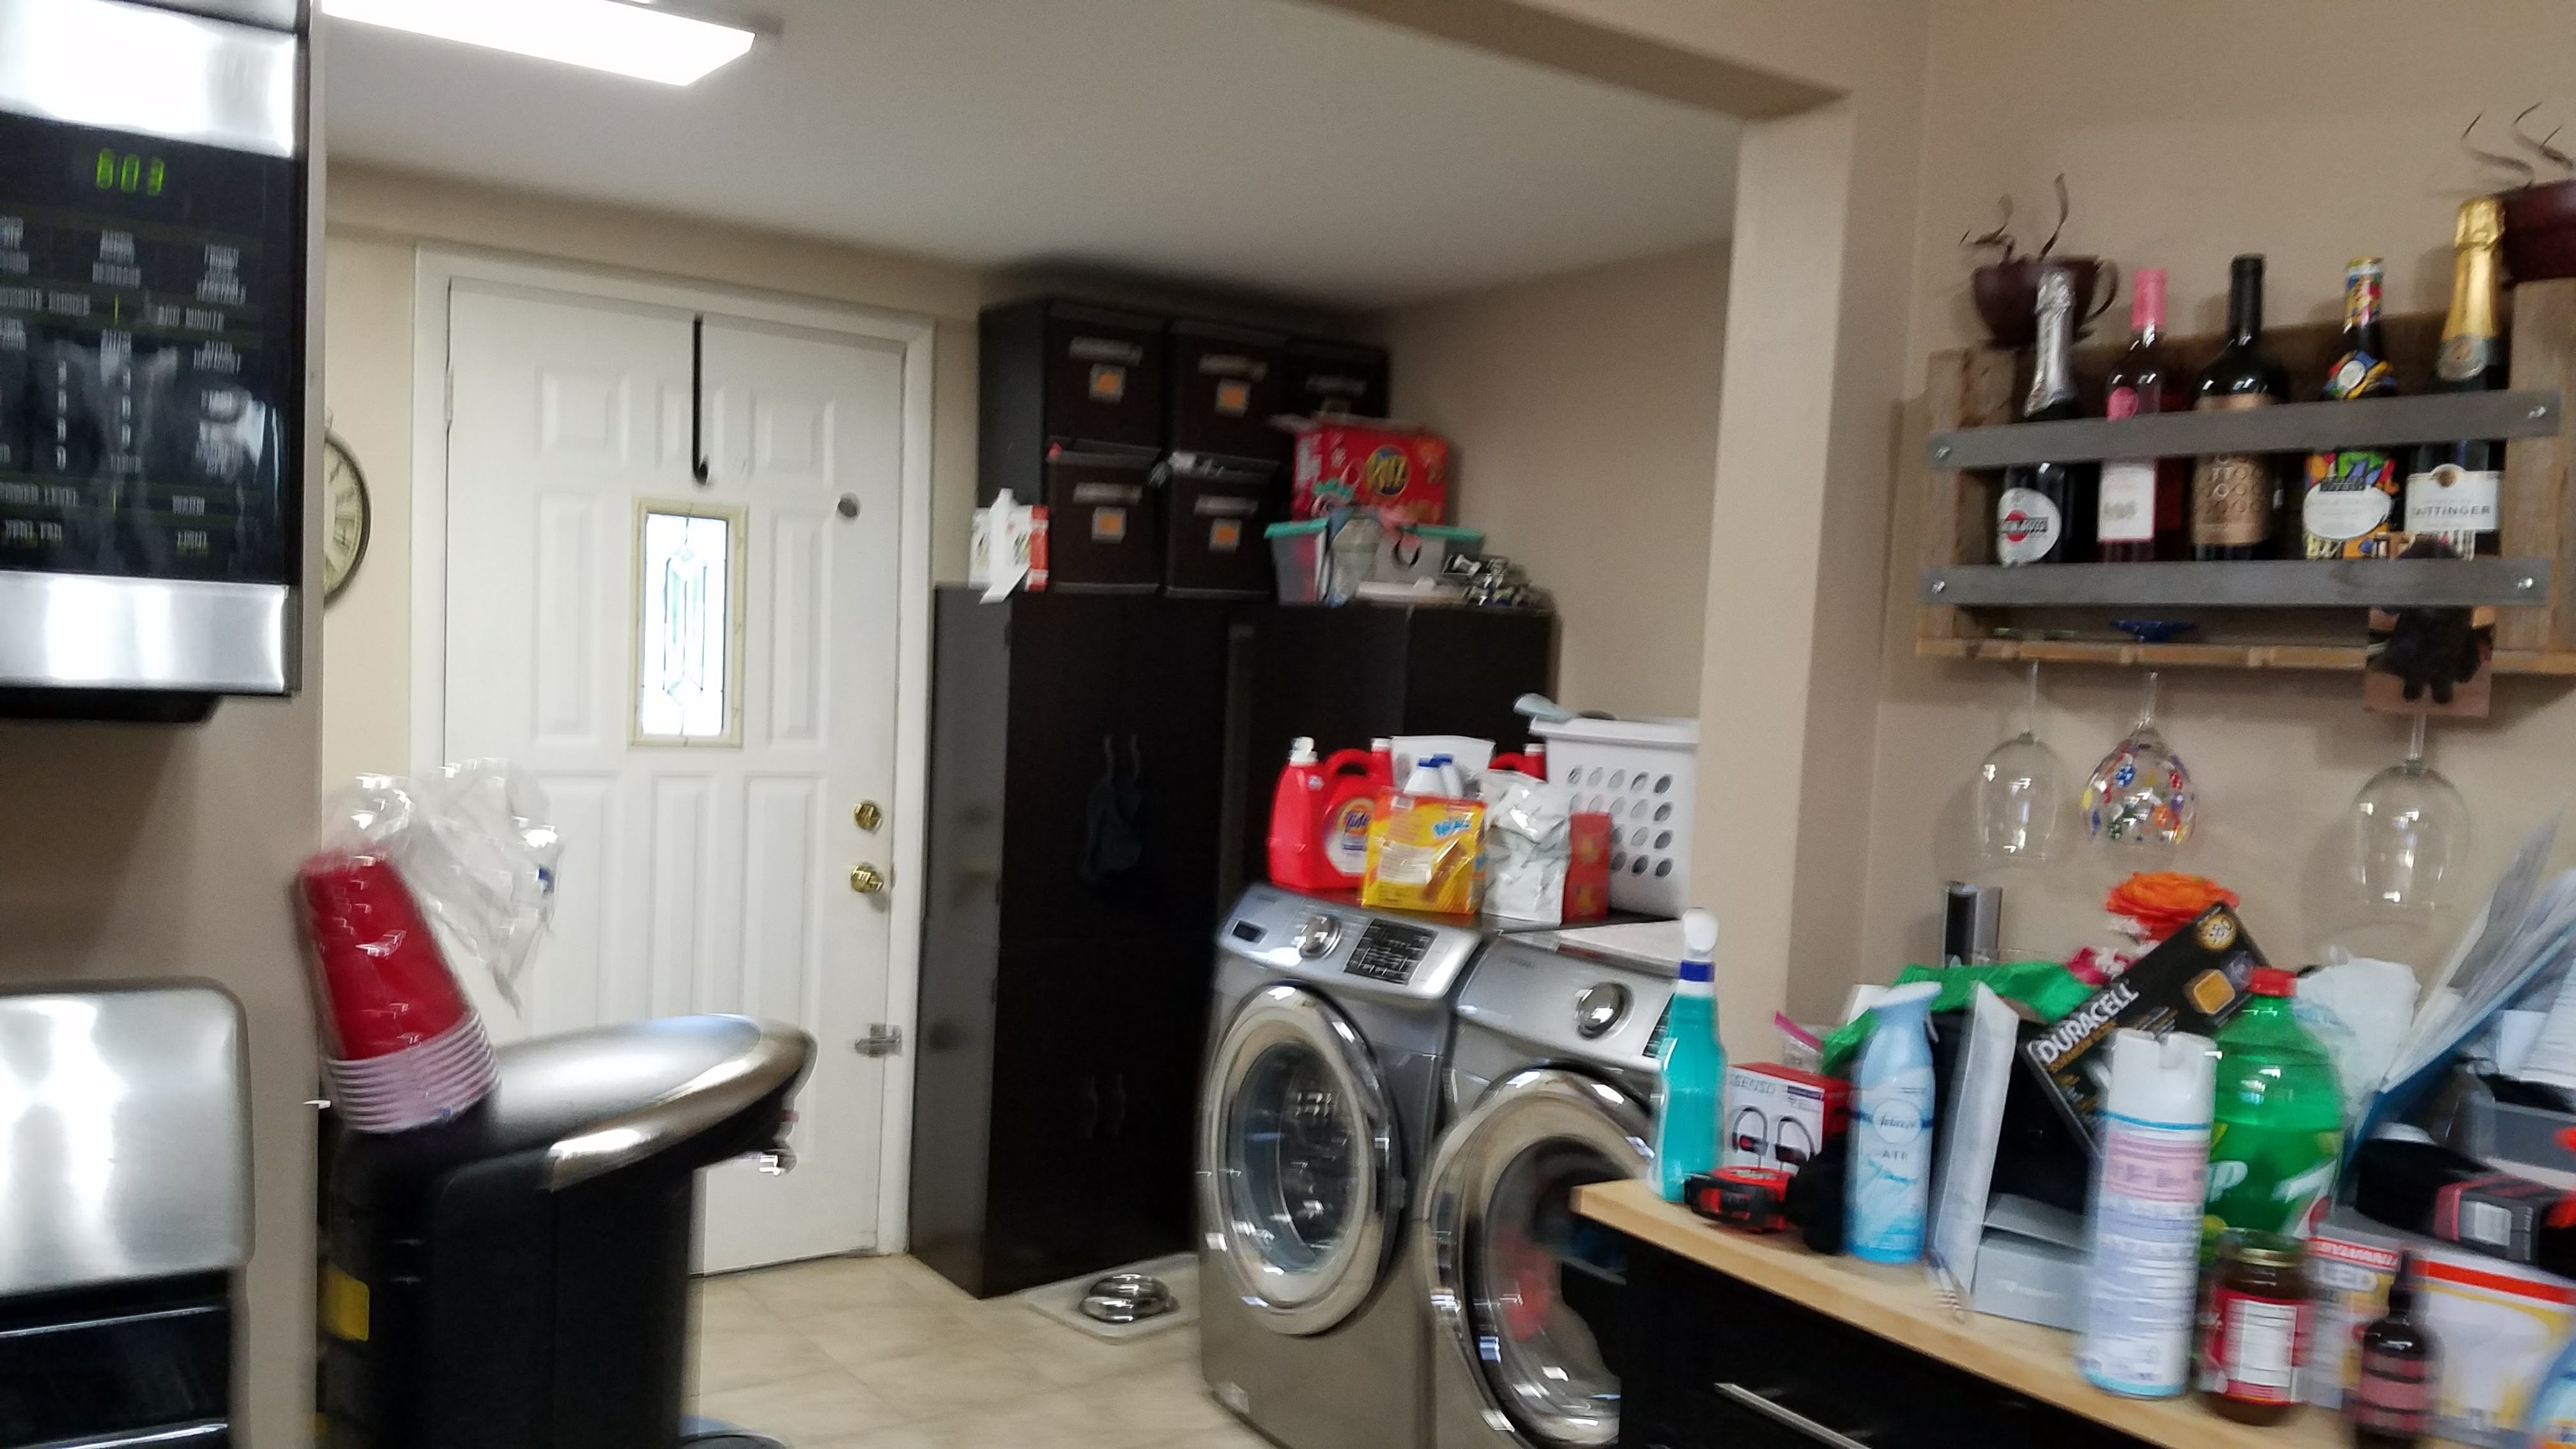 Cluttered Laundry Room